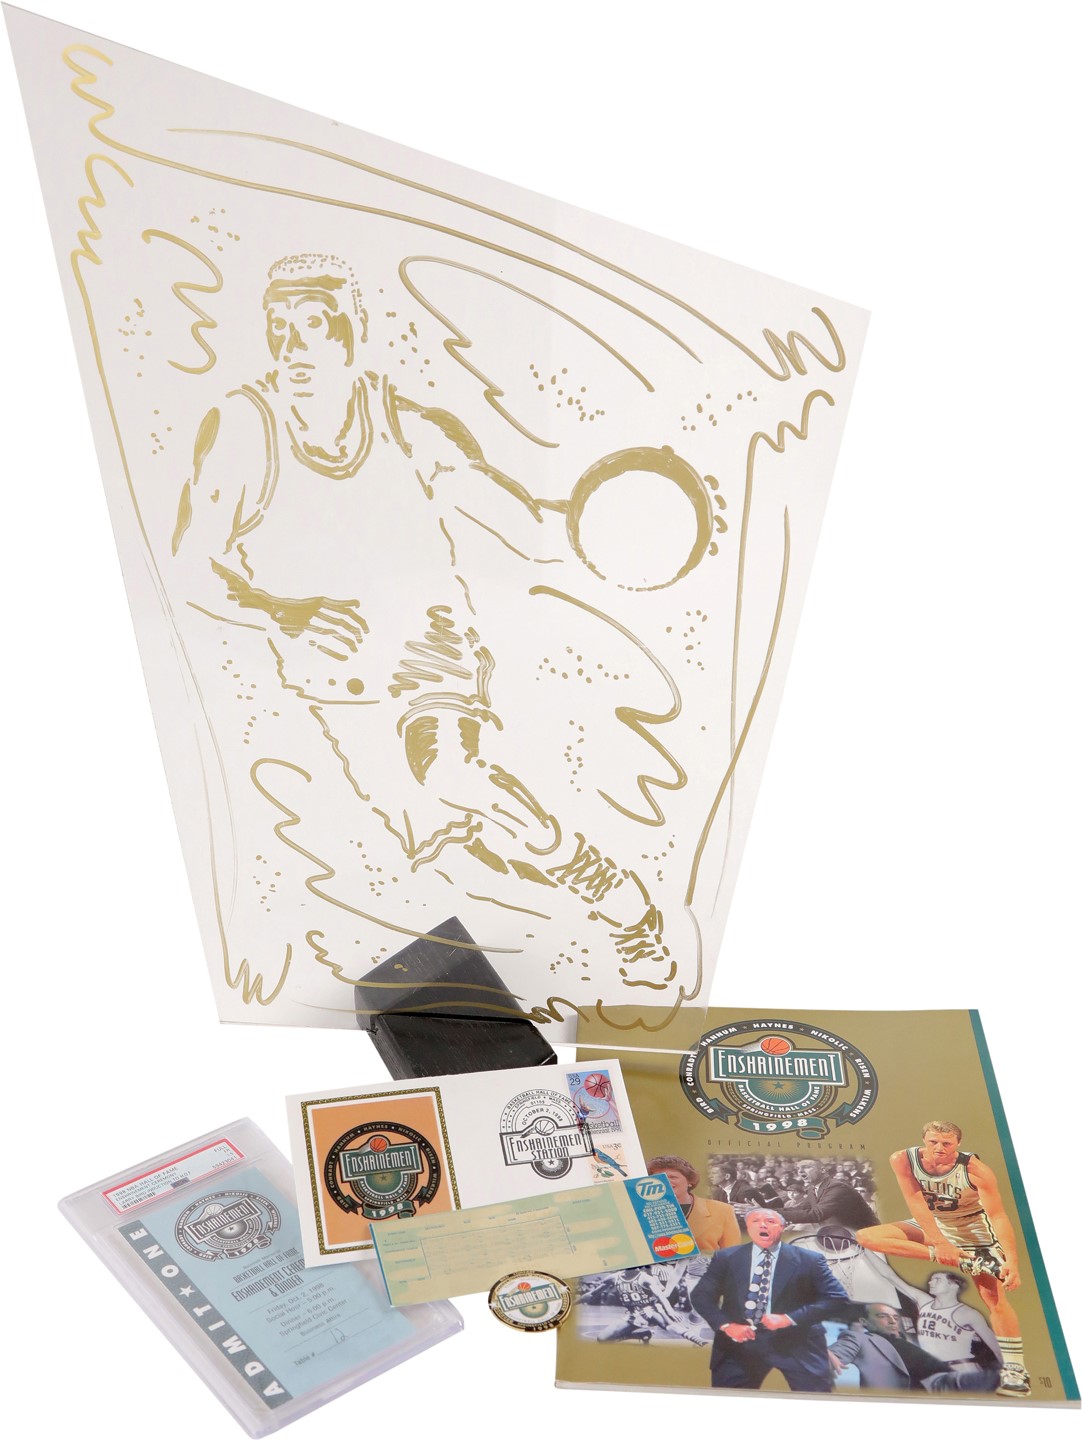 - 1988 Larry Bird HOF Induction Dinner Package with Rare Centerpiece